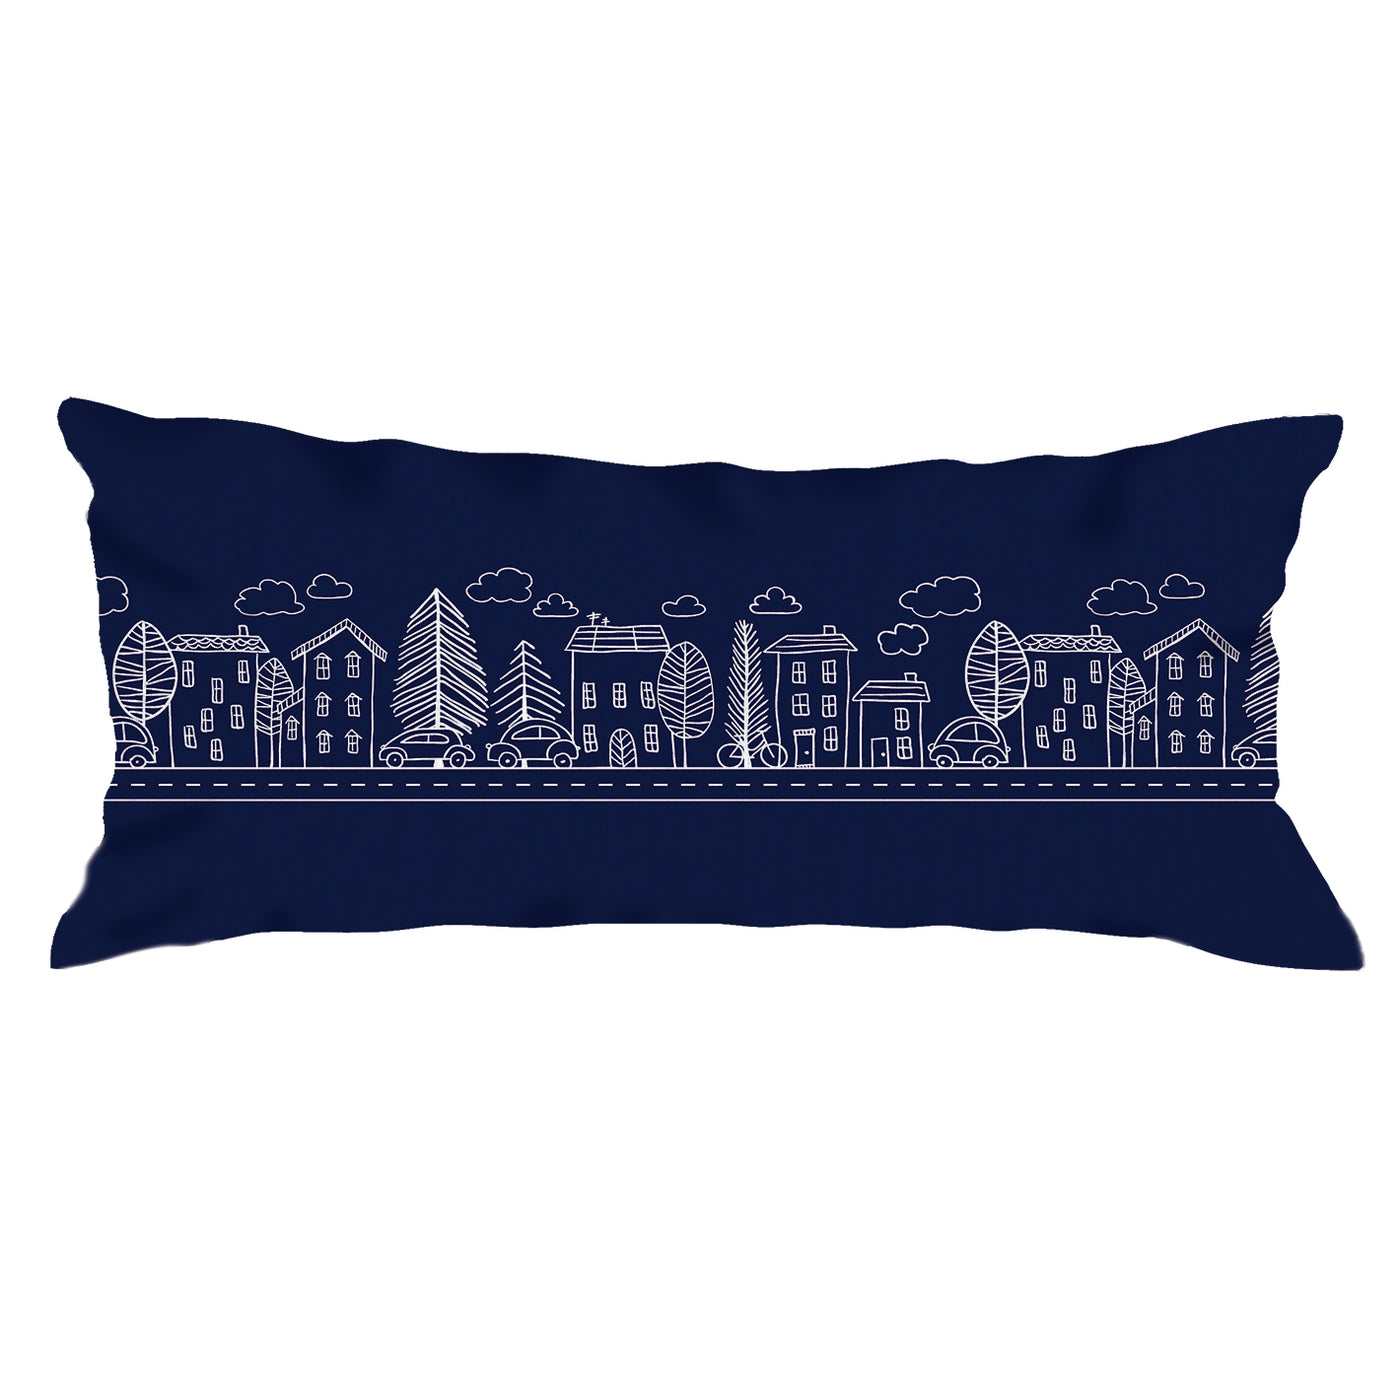 Hand Drawn Houses and Street Design on Scatter Cushion